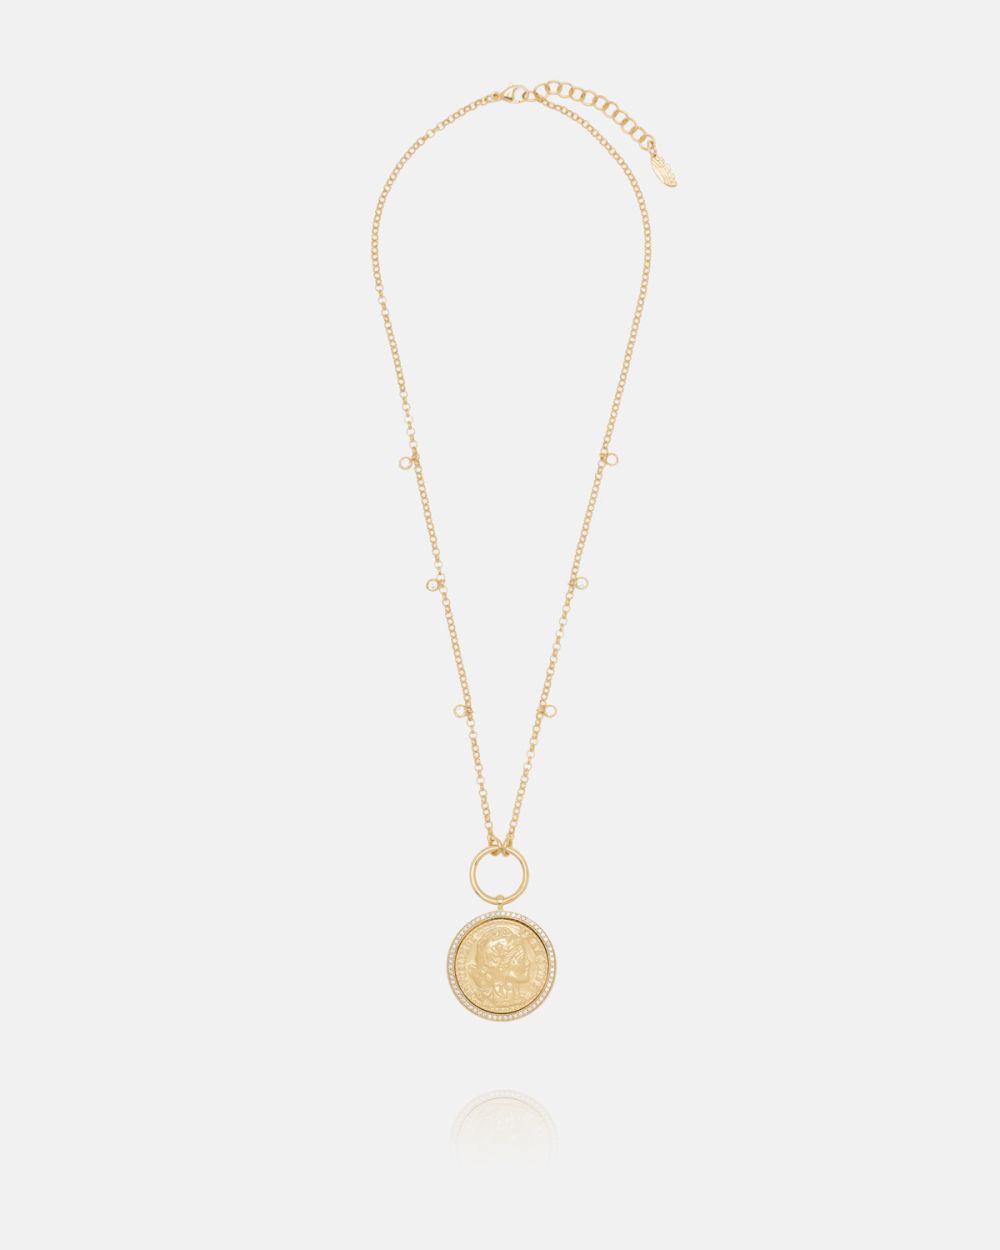 True Freedom Necklace in Gold Plated Silver with Zirconias